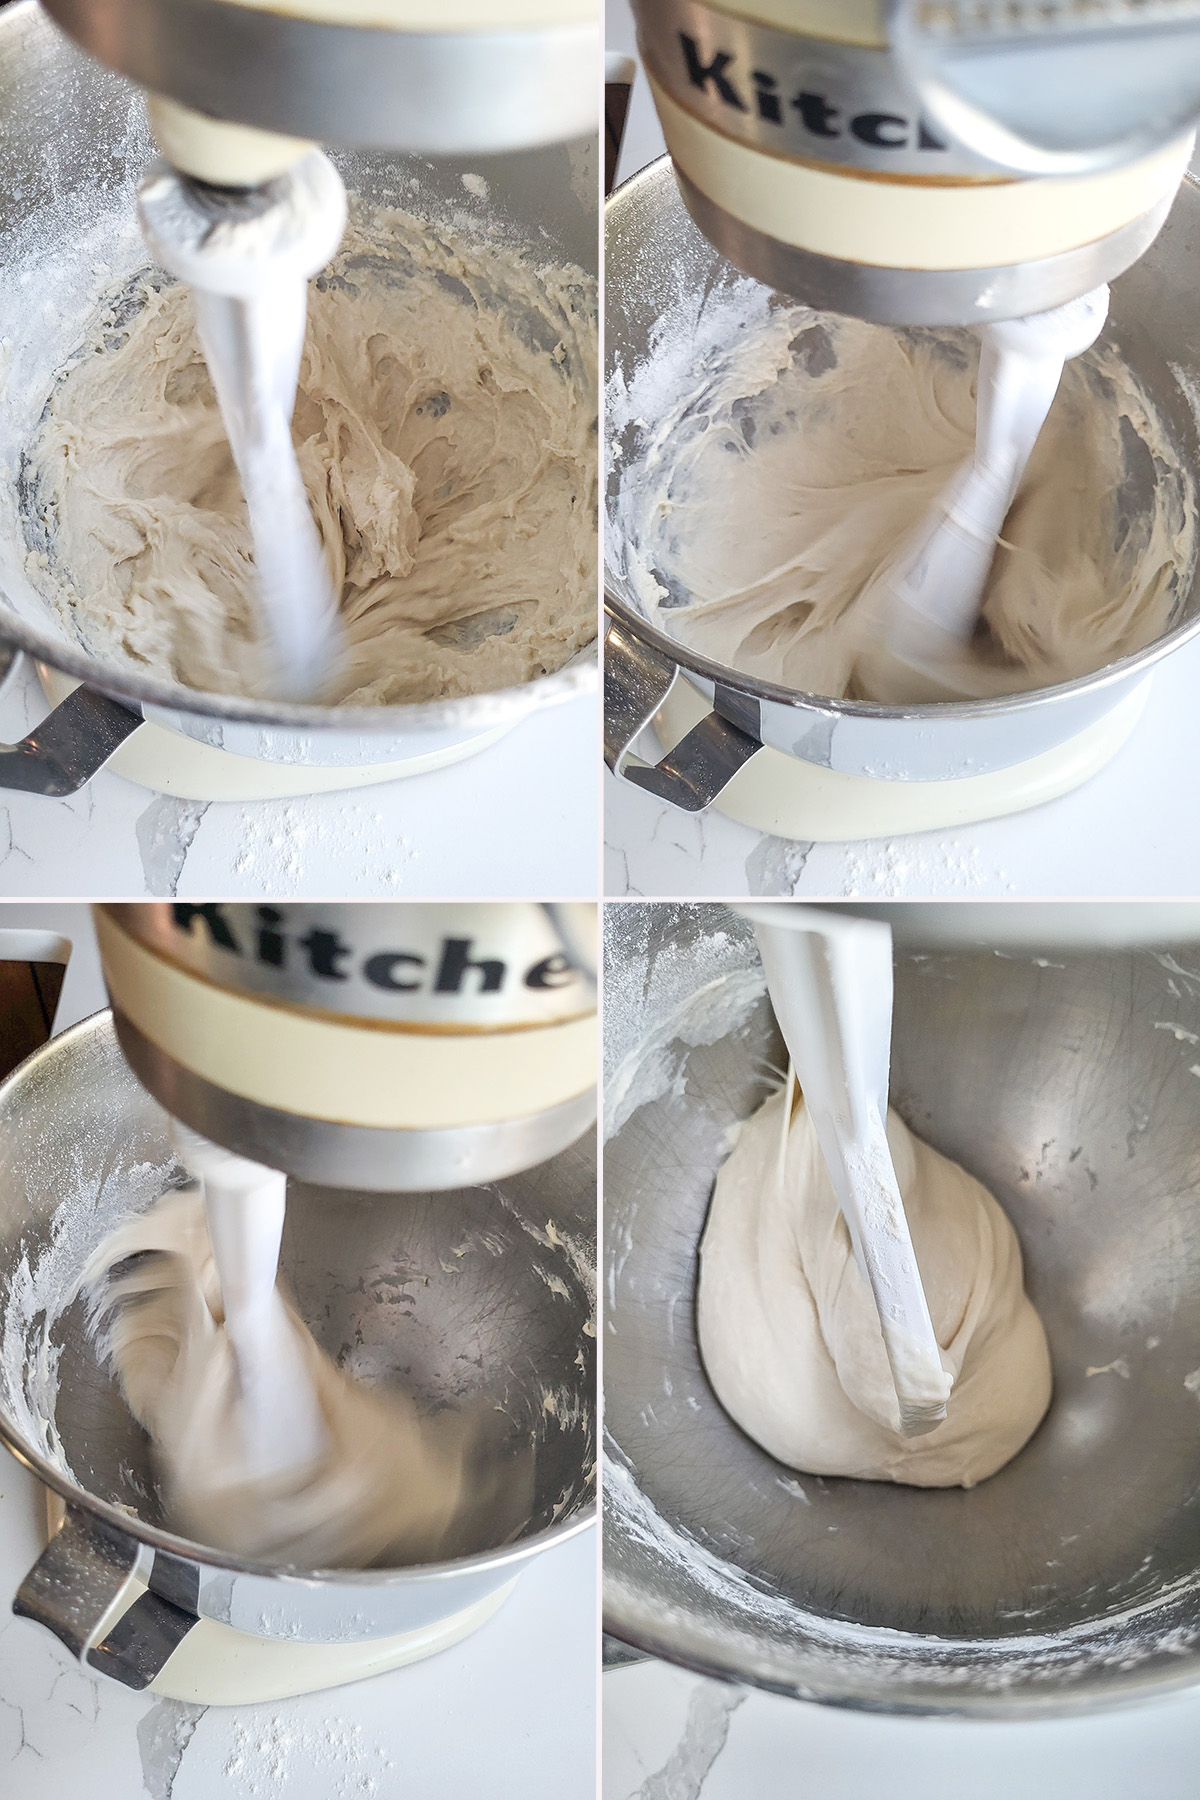 flour added to bread dough and mixed with a paddle in a mixing bowl.